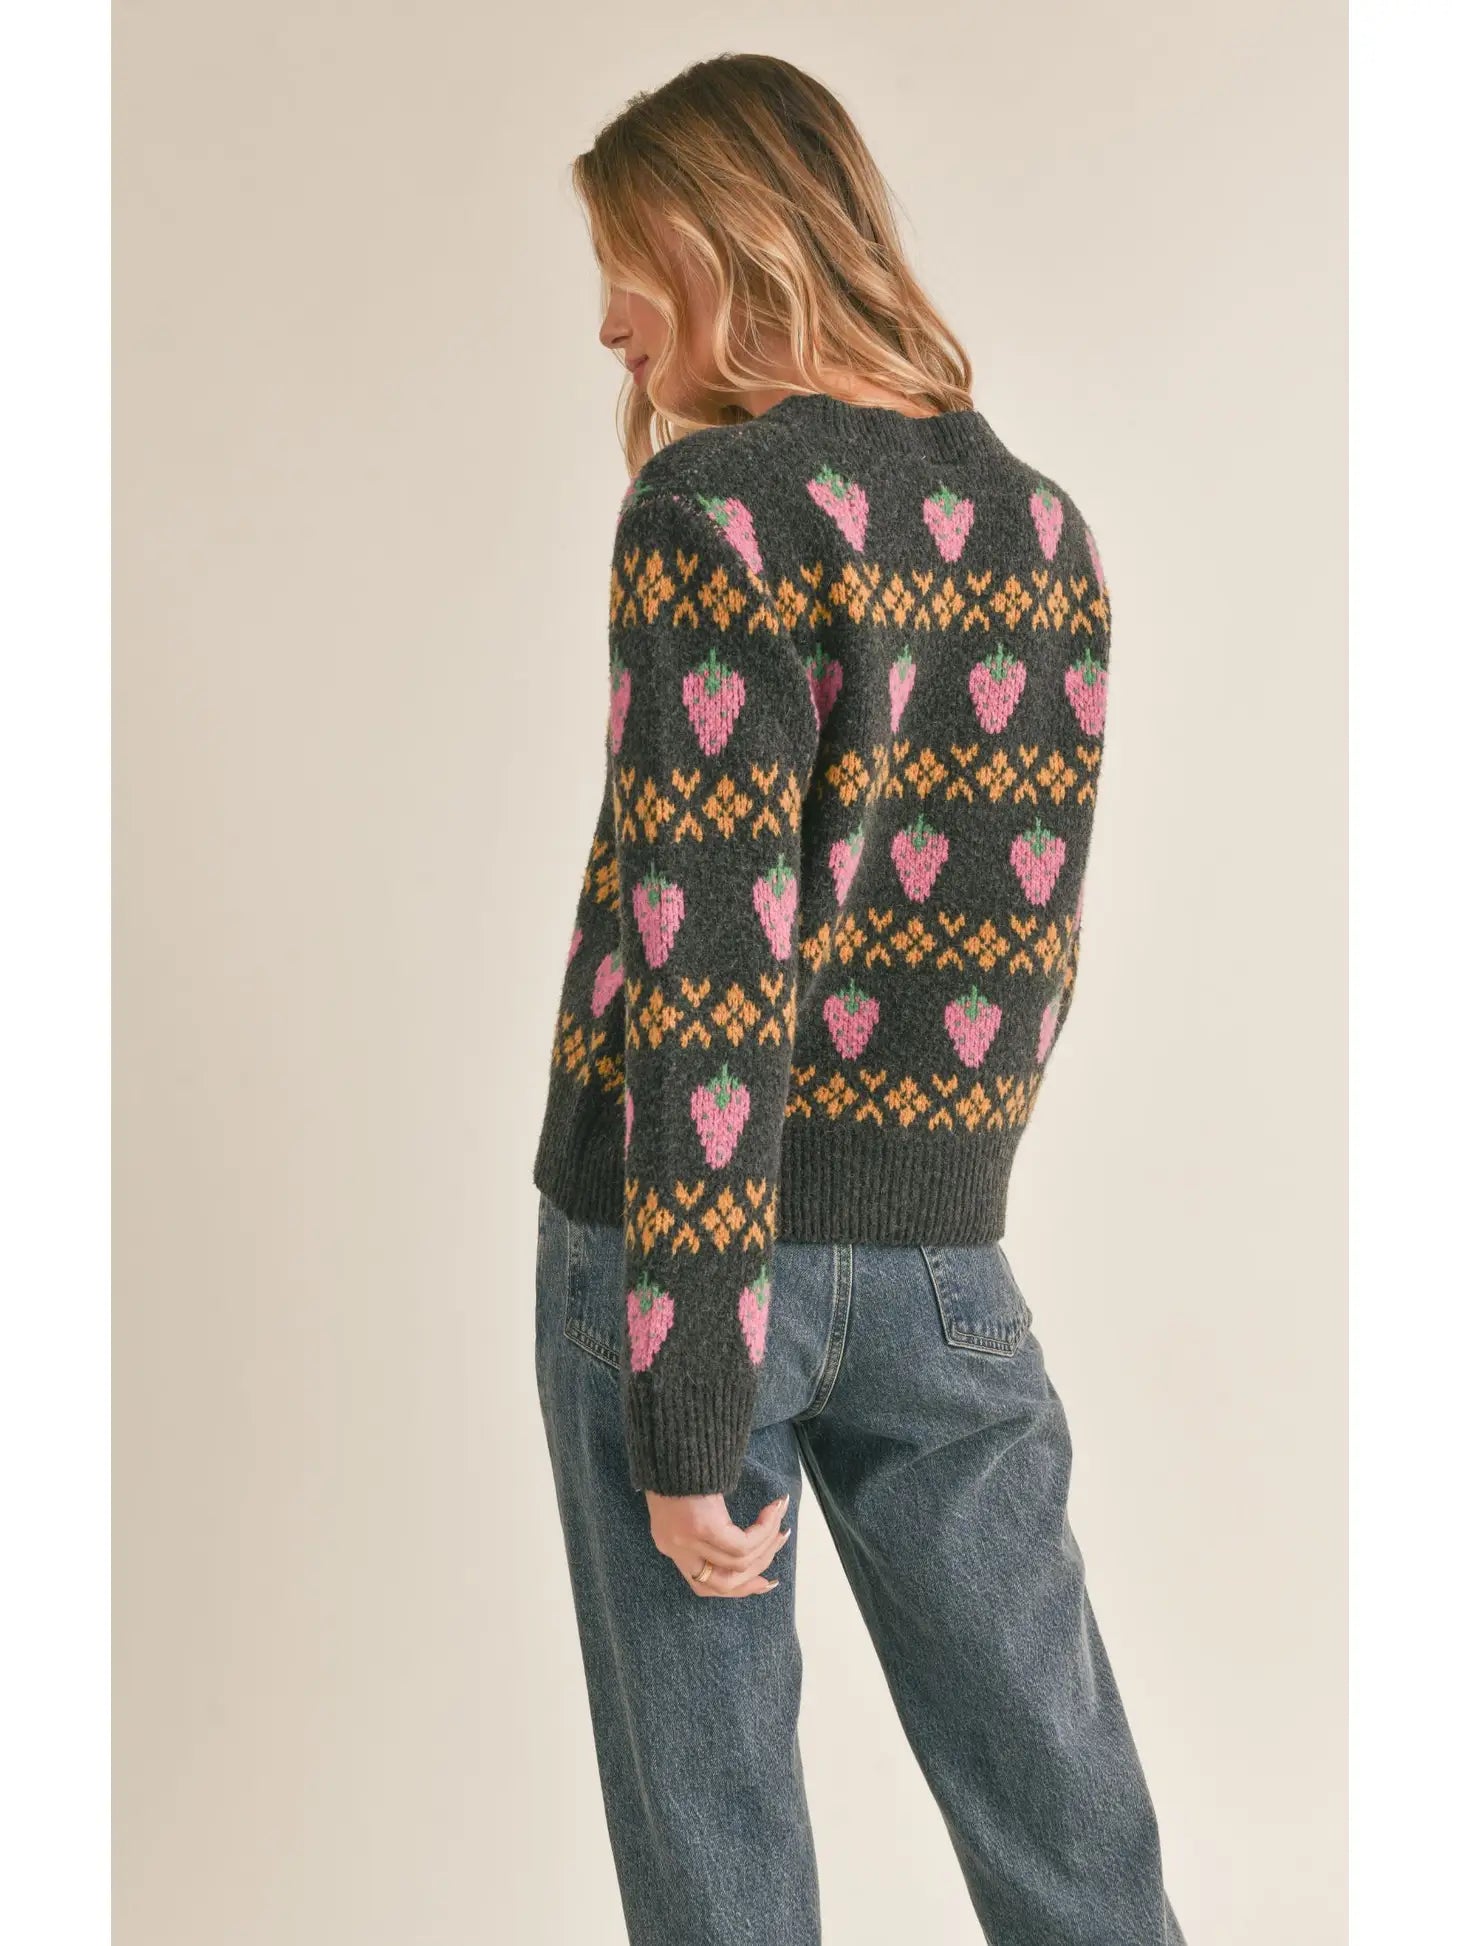 Berry Sweet Knit Charcoal Sweater